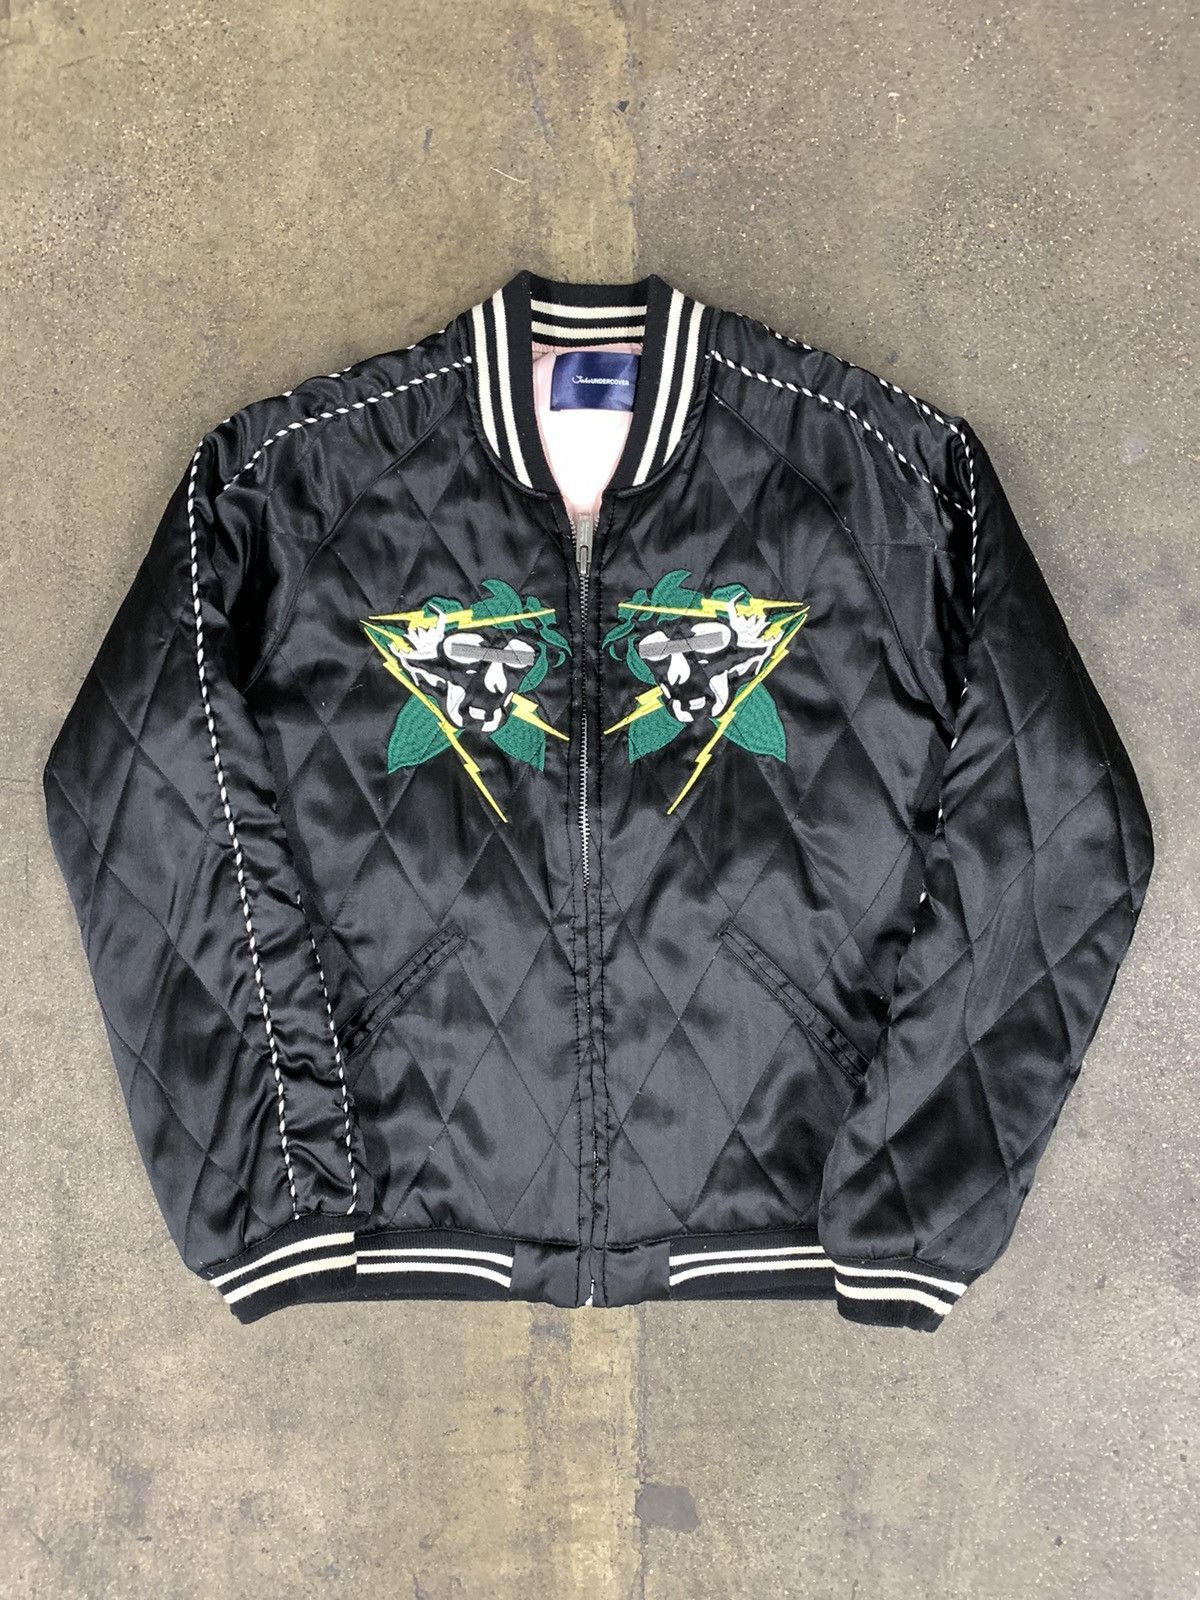 Undercover UNDERCOVER x WTAPS T/C TWILL ARMY PK WIDE JKT | Grailed